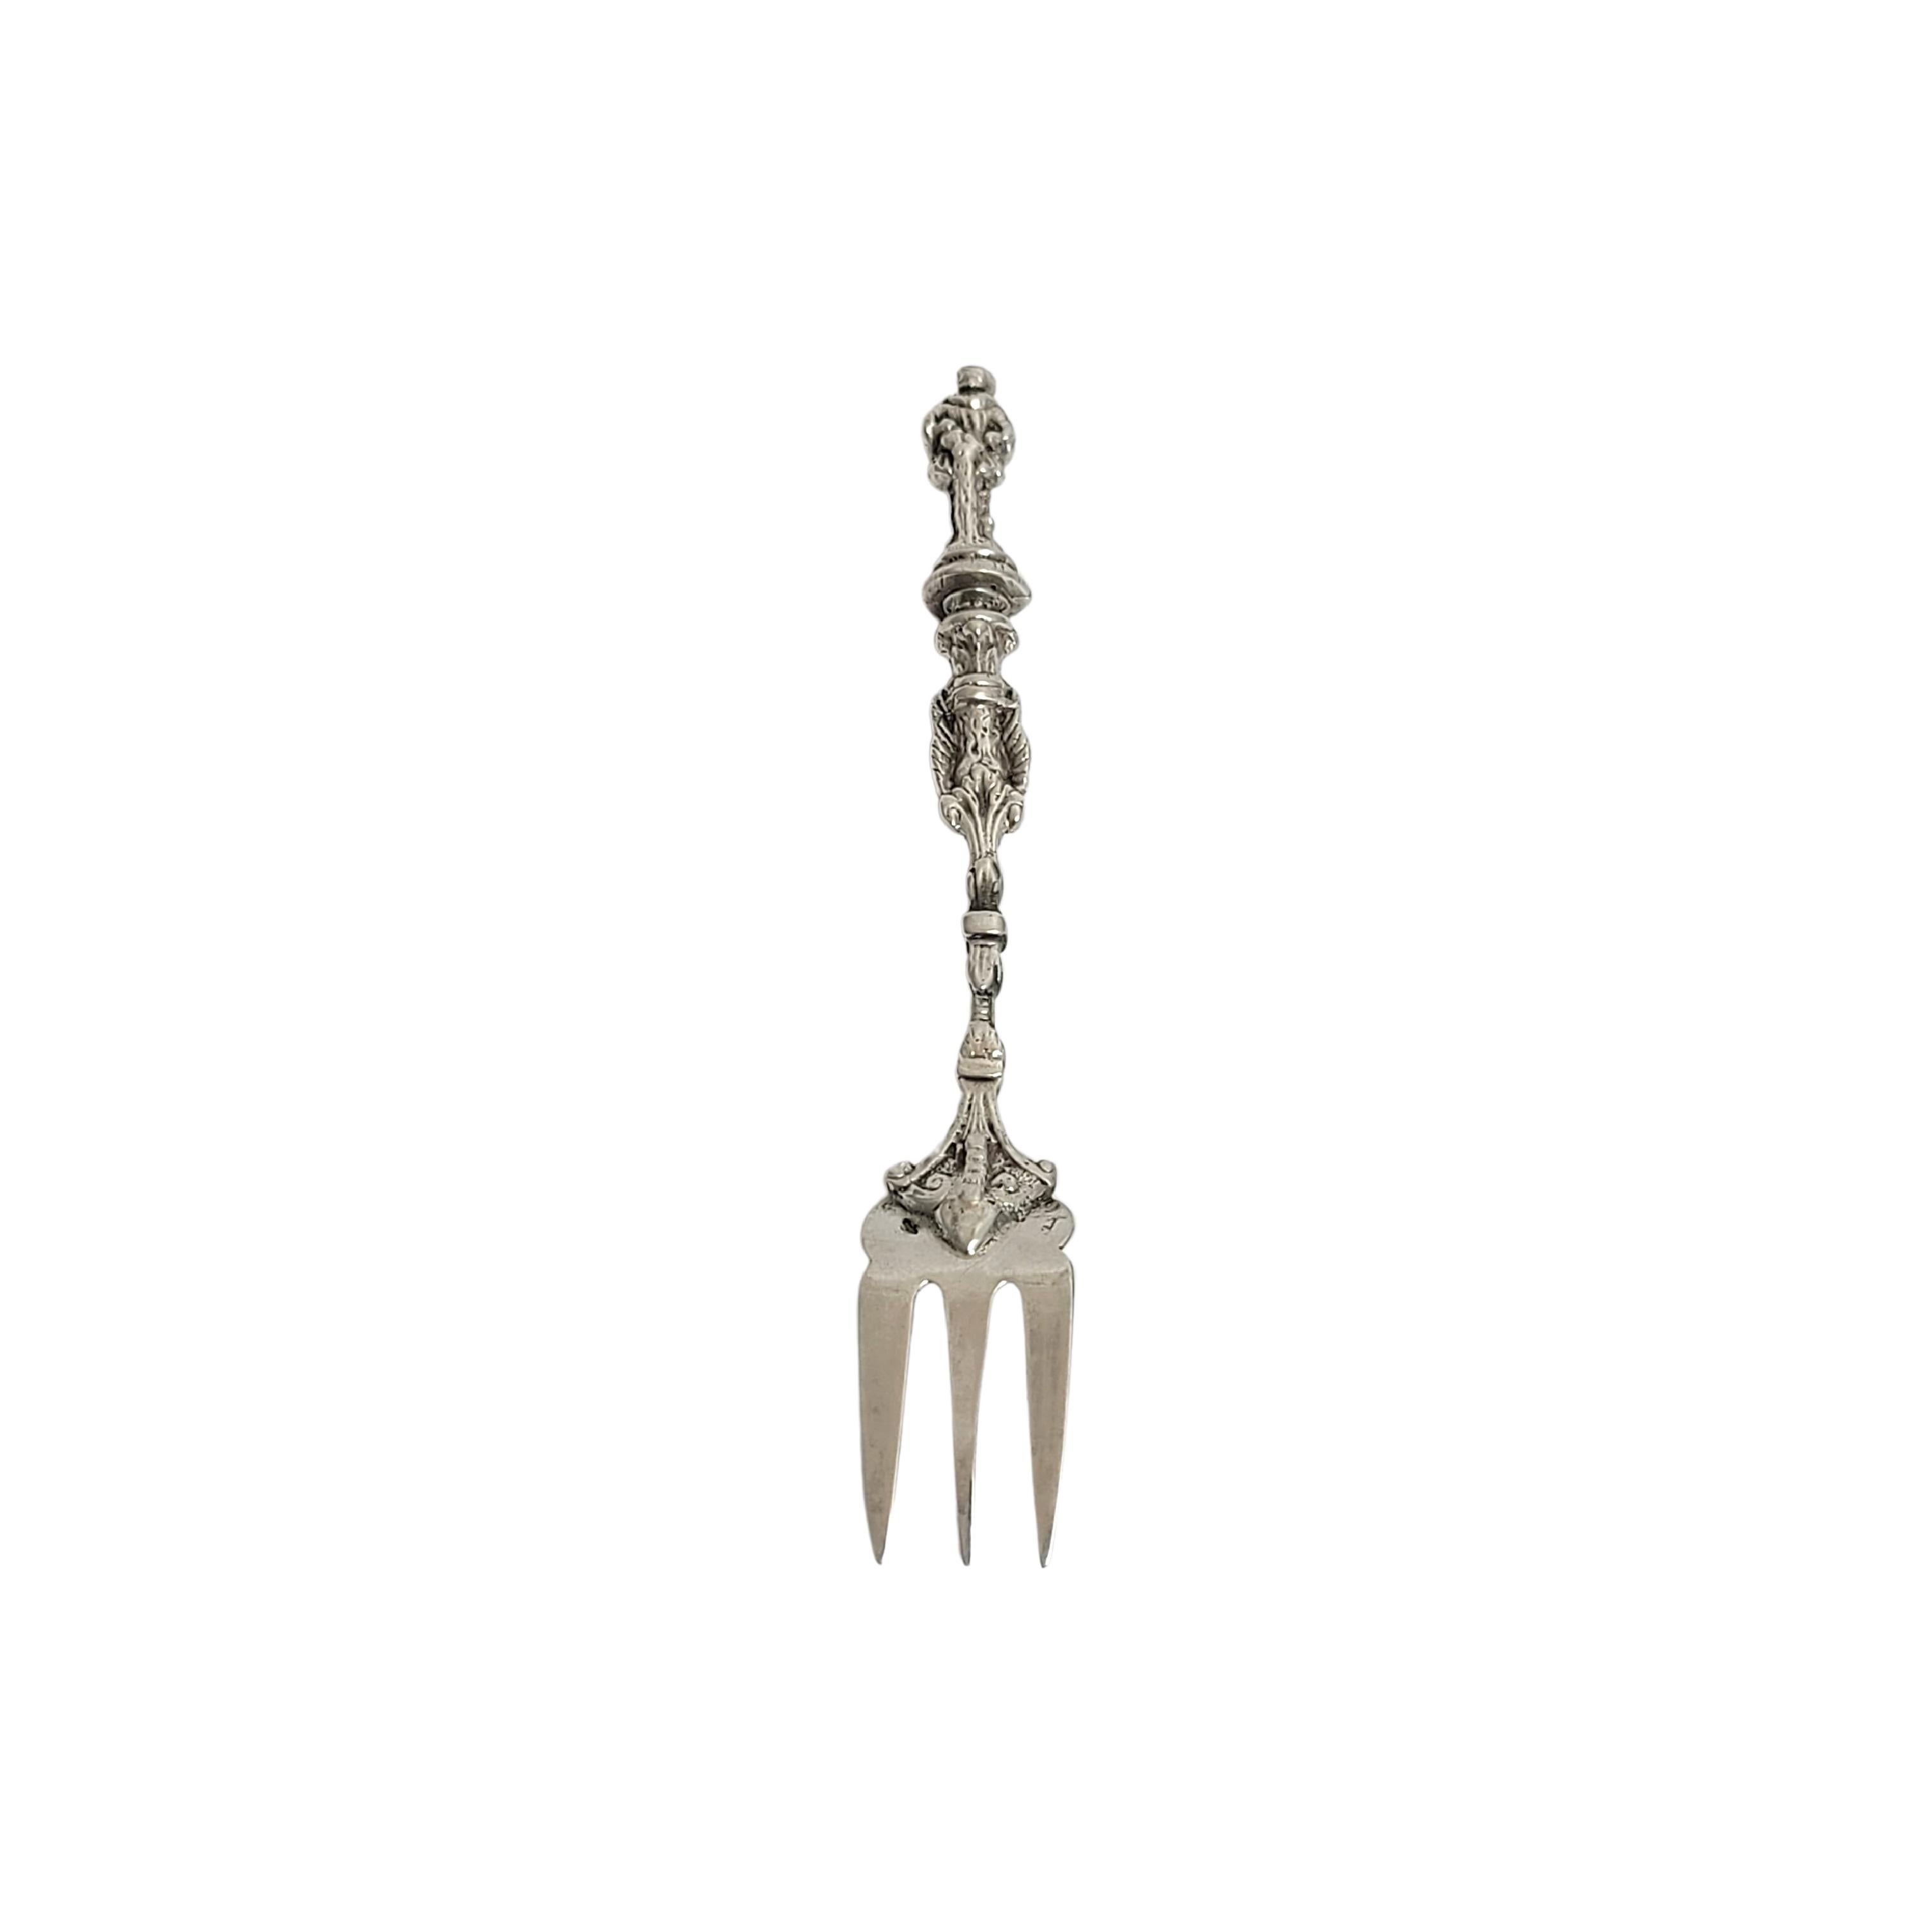 Dutch 833 silver figural fork, circa 1814-1905.

Small fork featuring a Dutch man atop the ornate handle.

Measures approx 4 1/2